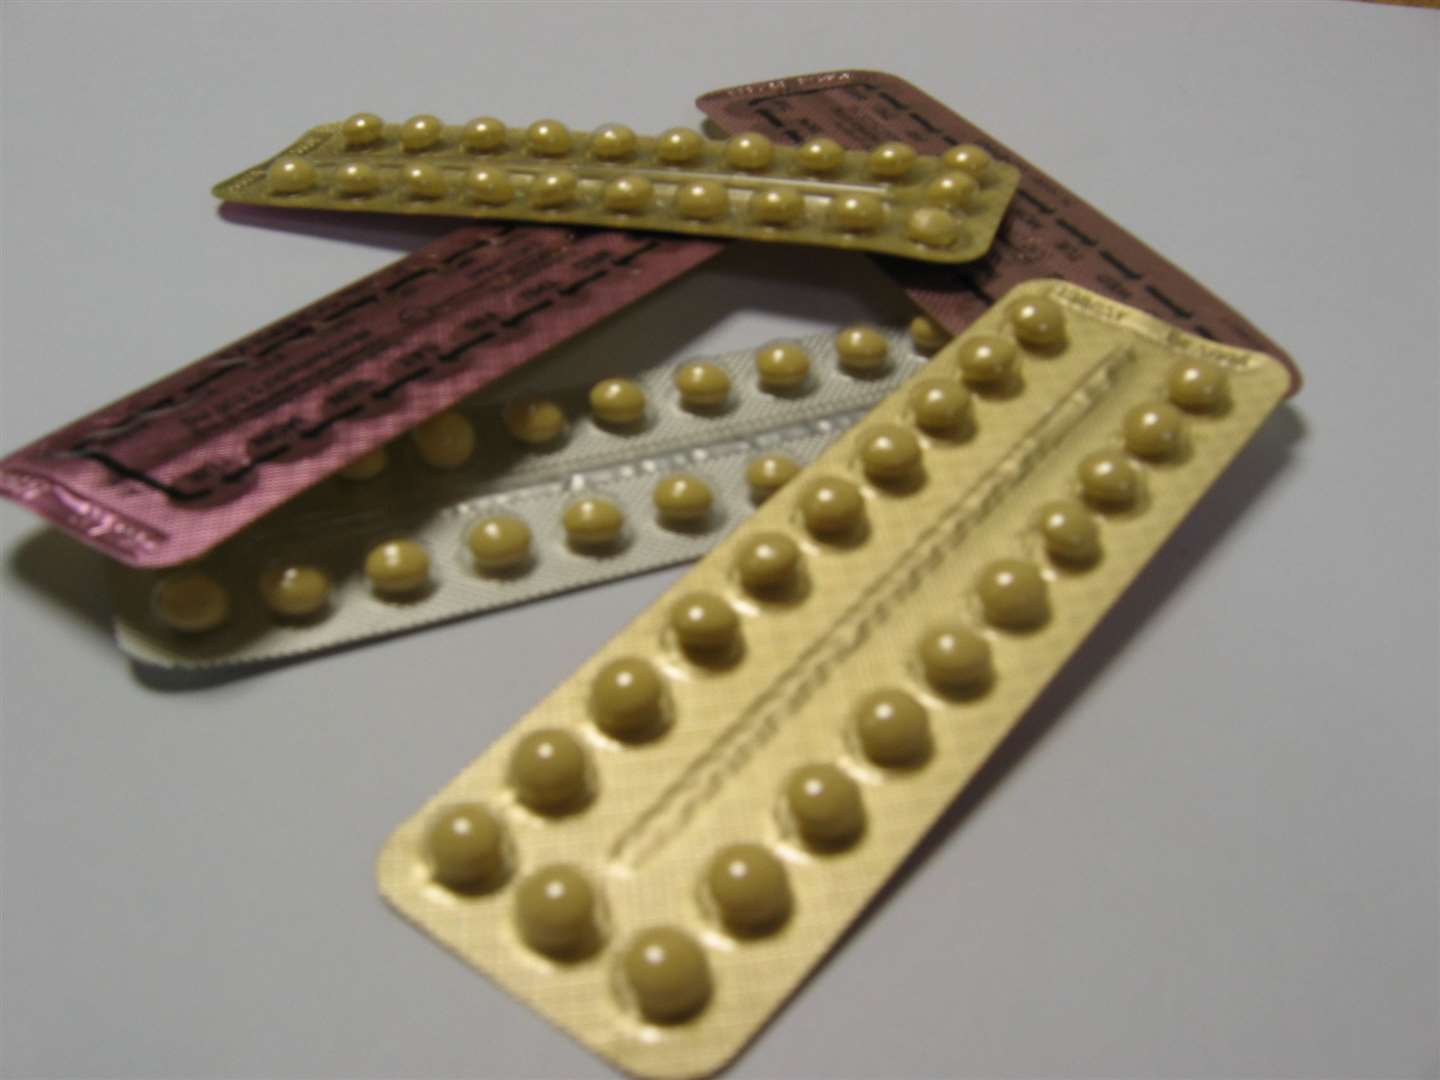 Blood clots are a recognised side effect of contraceptive pills